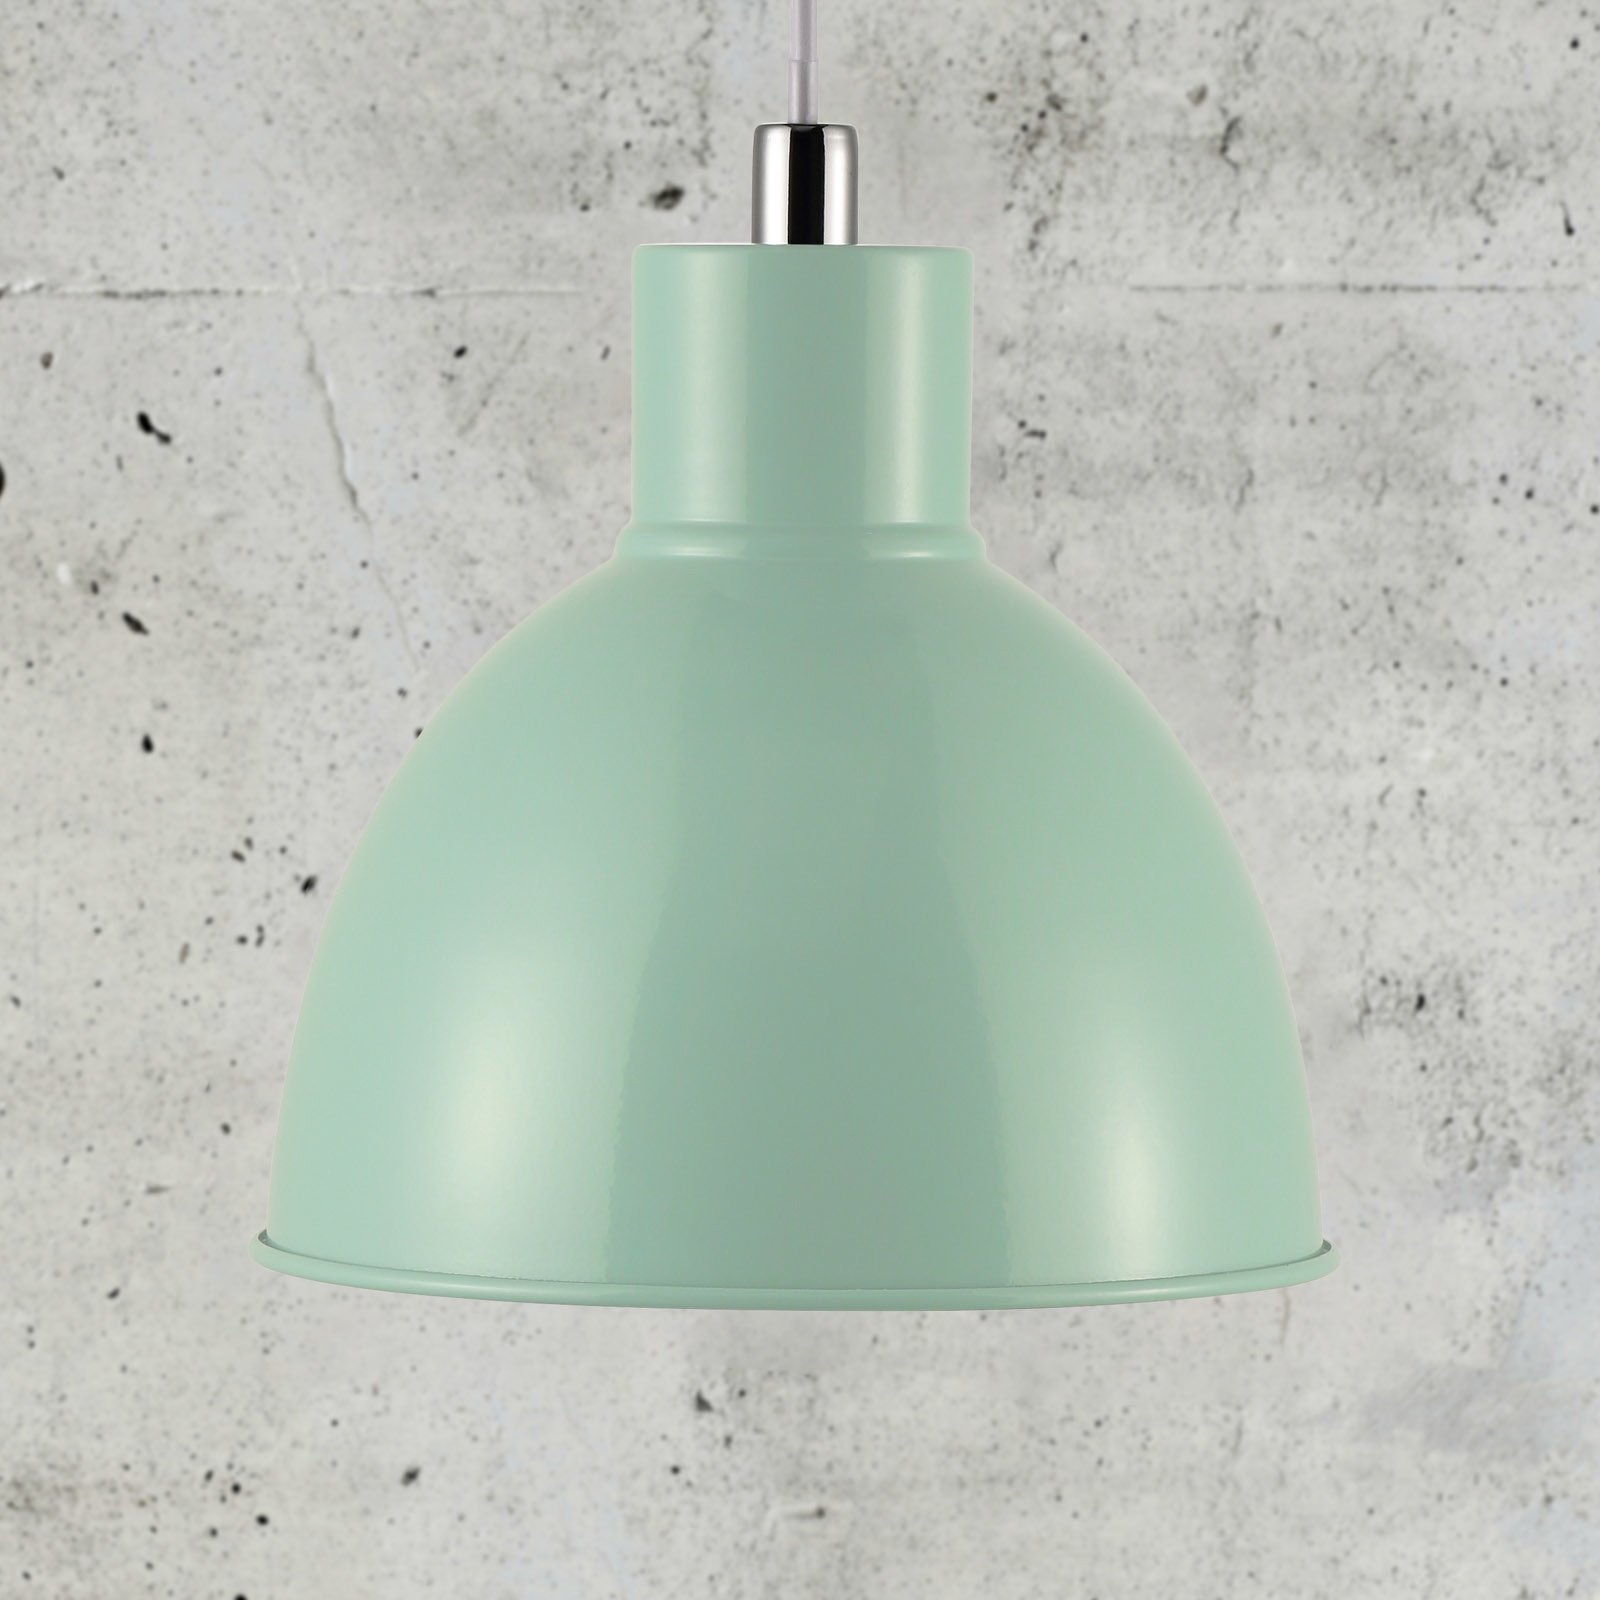 Pop hanging light with metal lampshade green